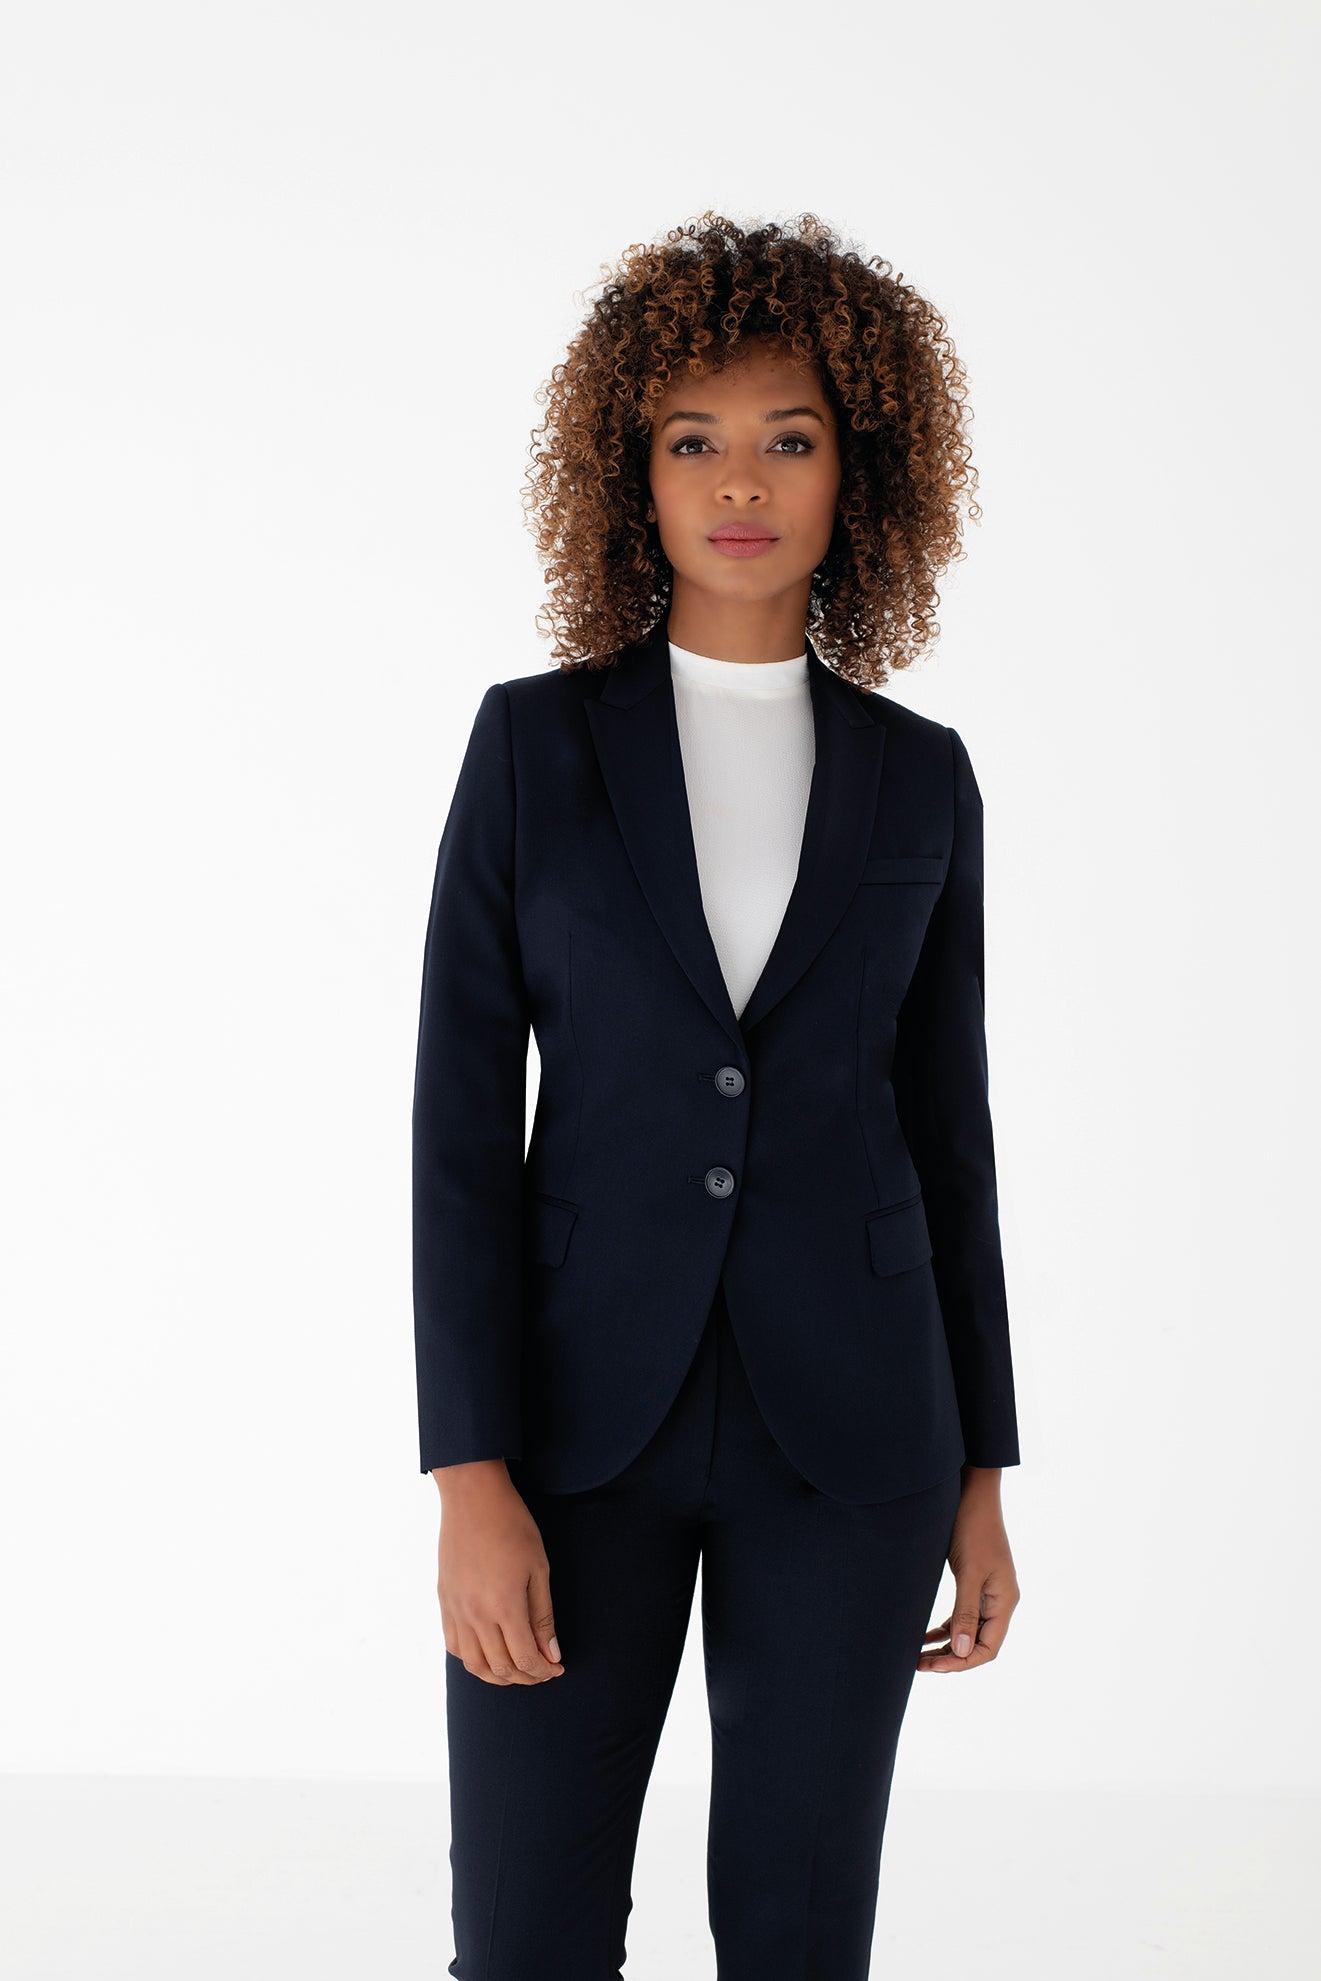 Womens Workwear  Suits for Women  Verycouk